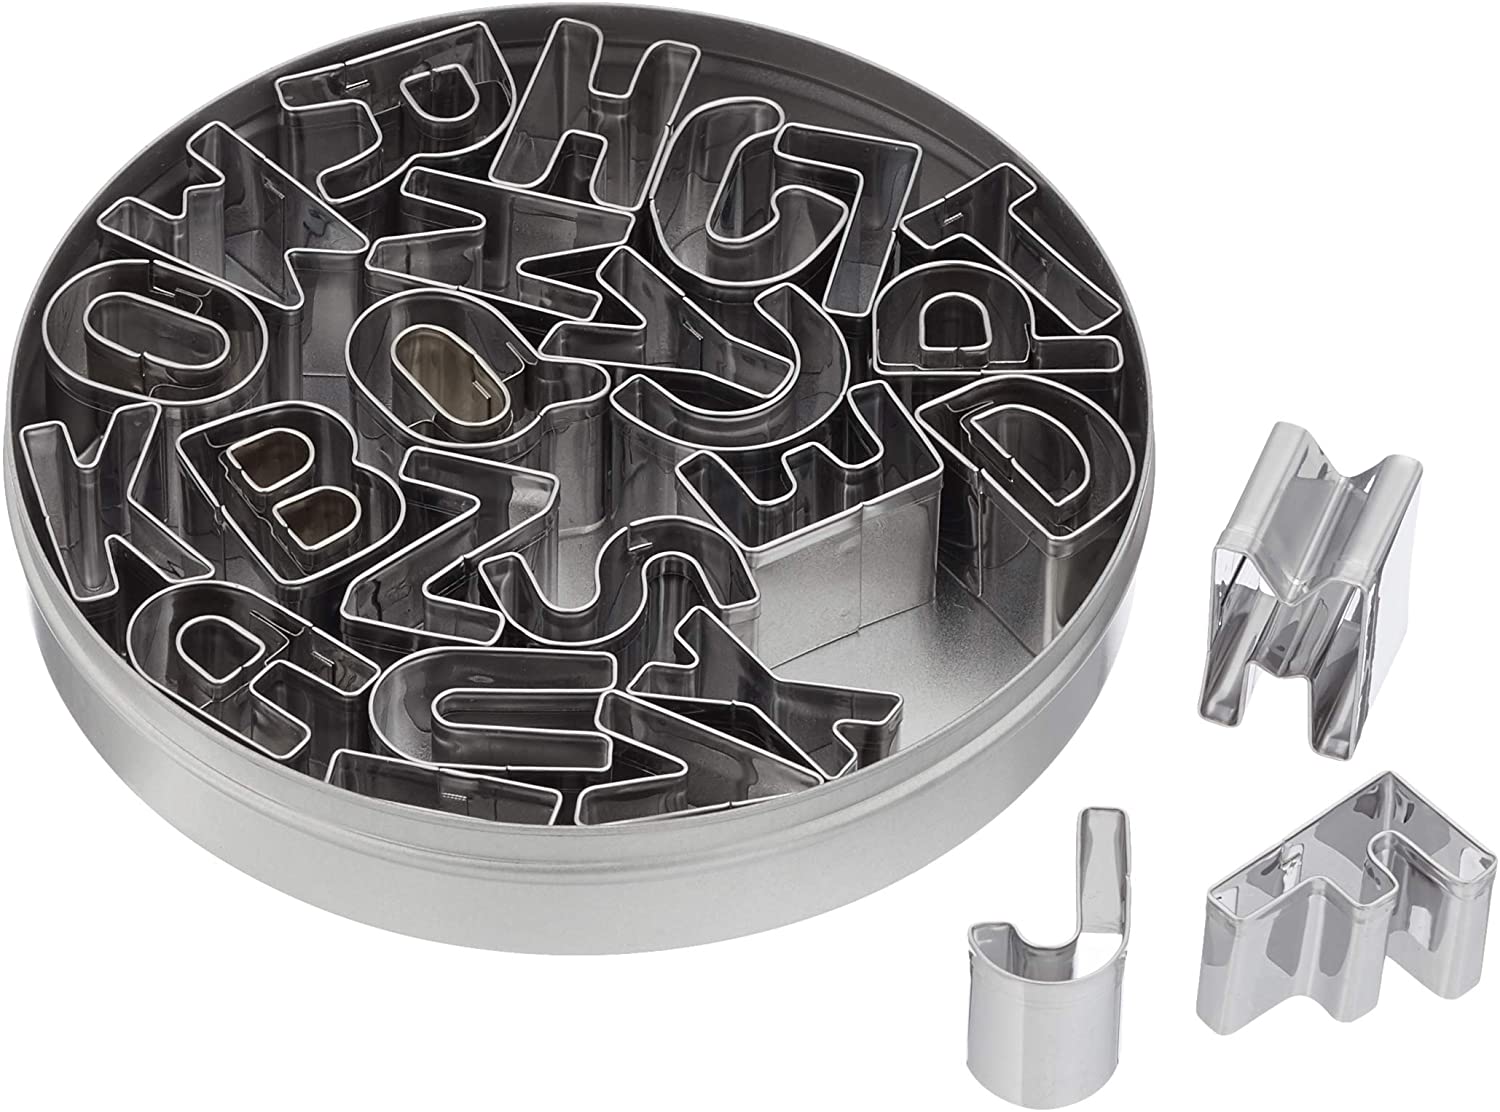 Städter Cake Boss CB58915 Jar with Biscuit Cutters, Set of 26 Letters Stainless Steel, Silver, 12 x 12 x 3 cm